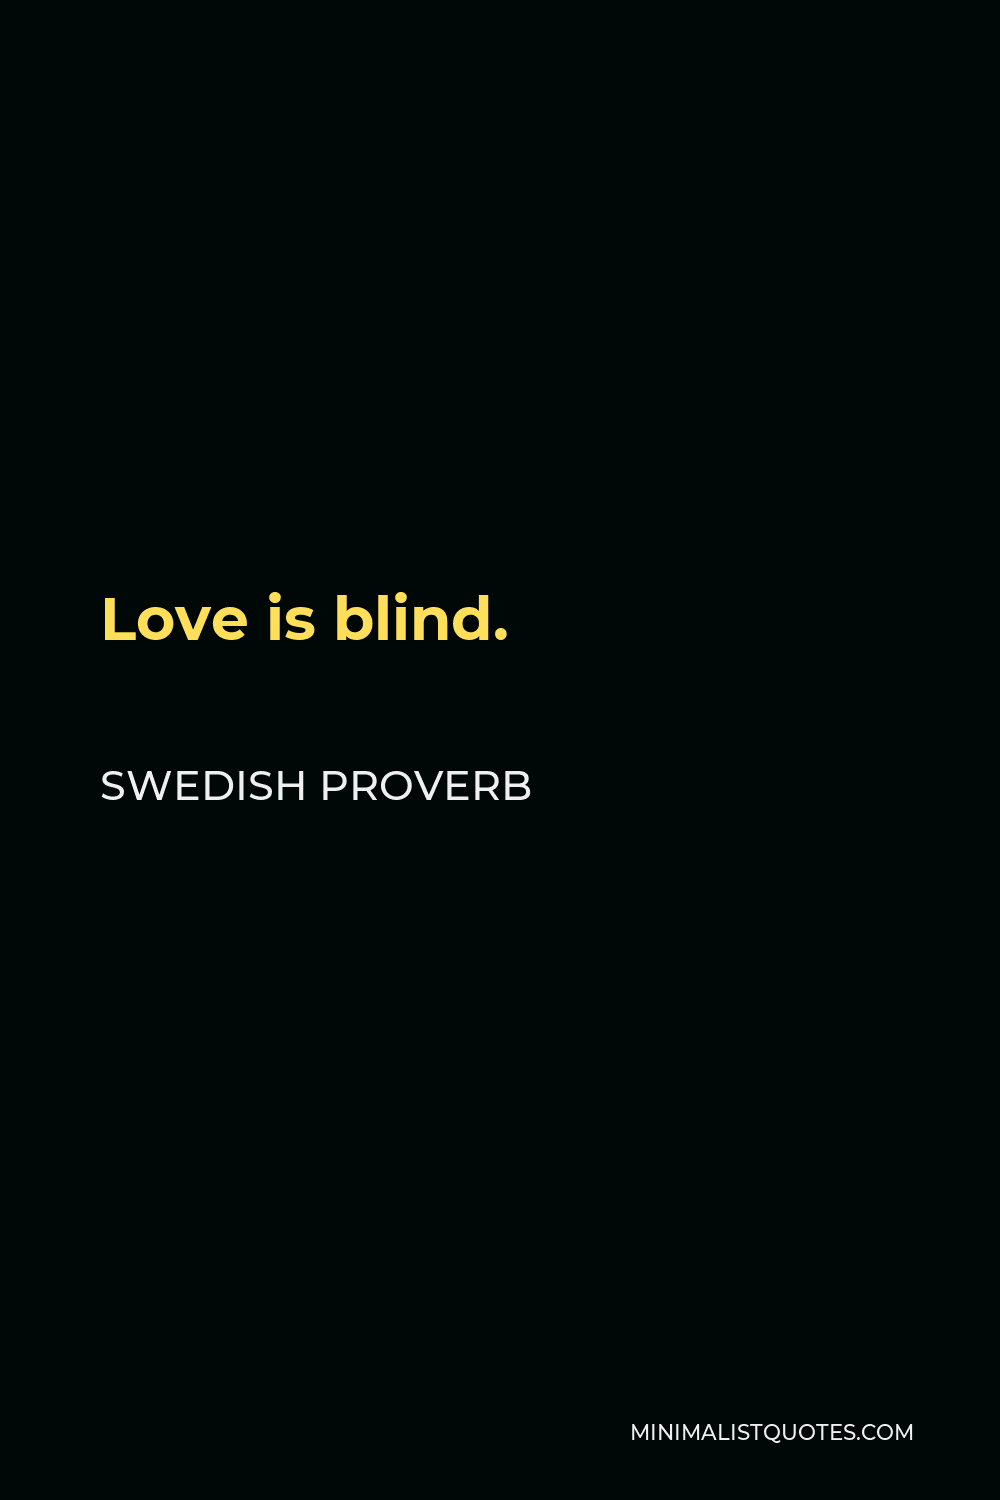 Swedish Proverb Quote - Love is blind.